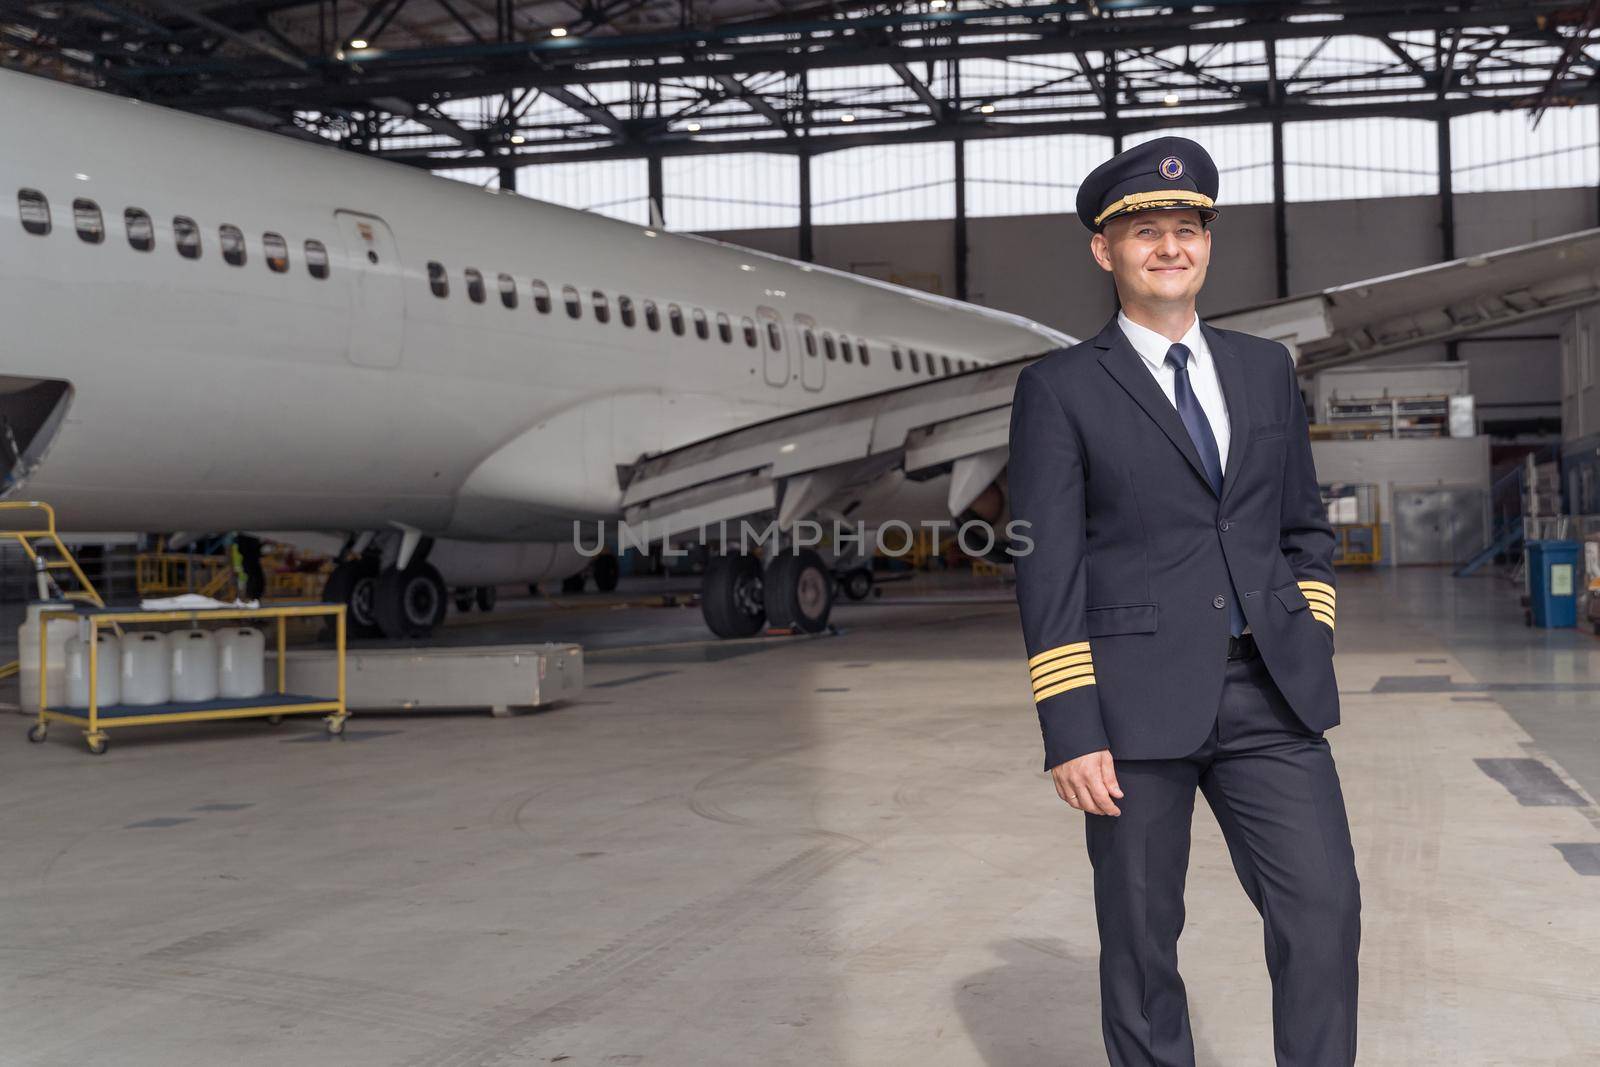 Smiling pilot posing against the backdrop of the aircraft in the hangar by Yaroslav_astakhov